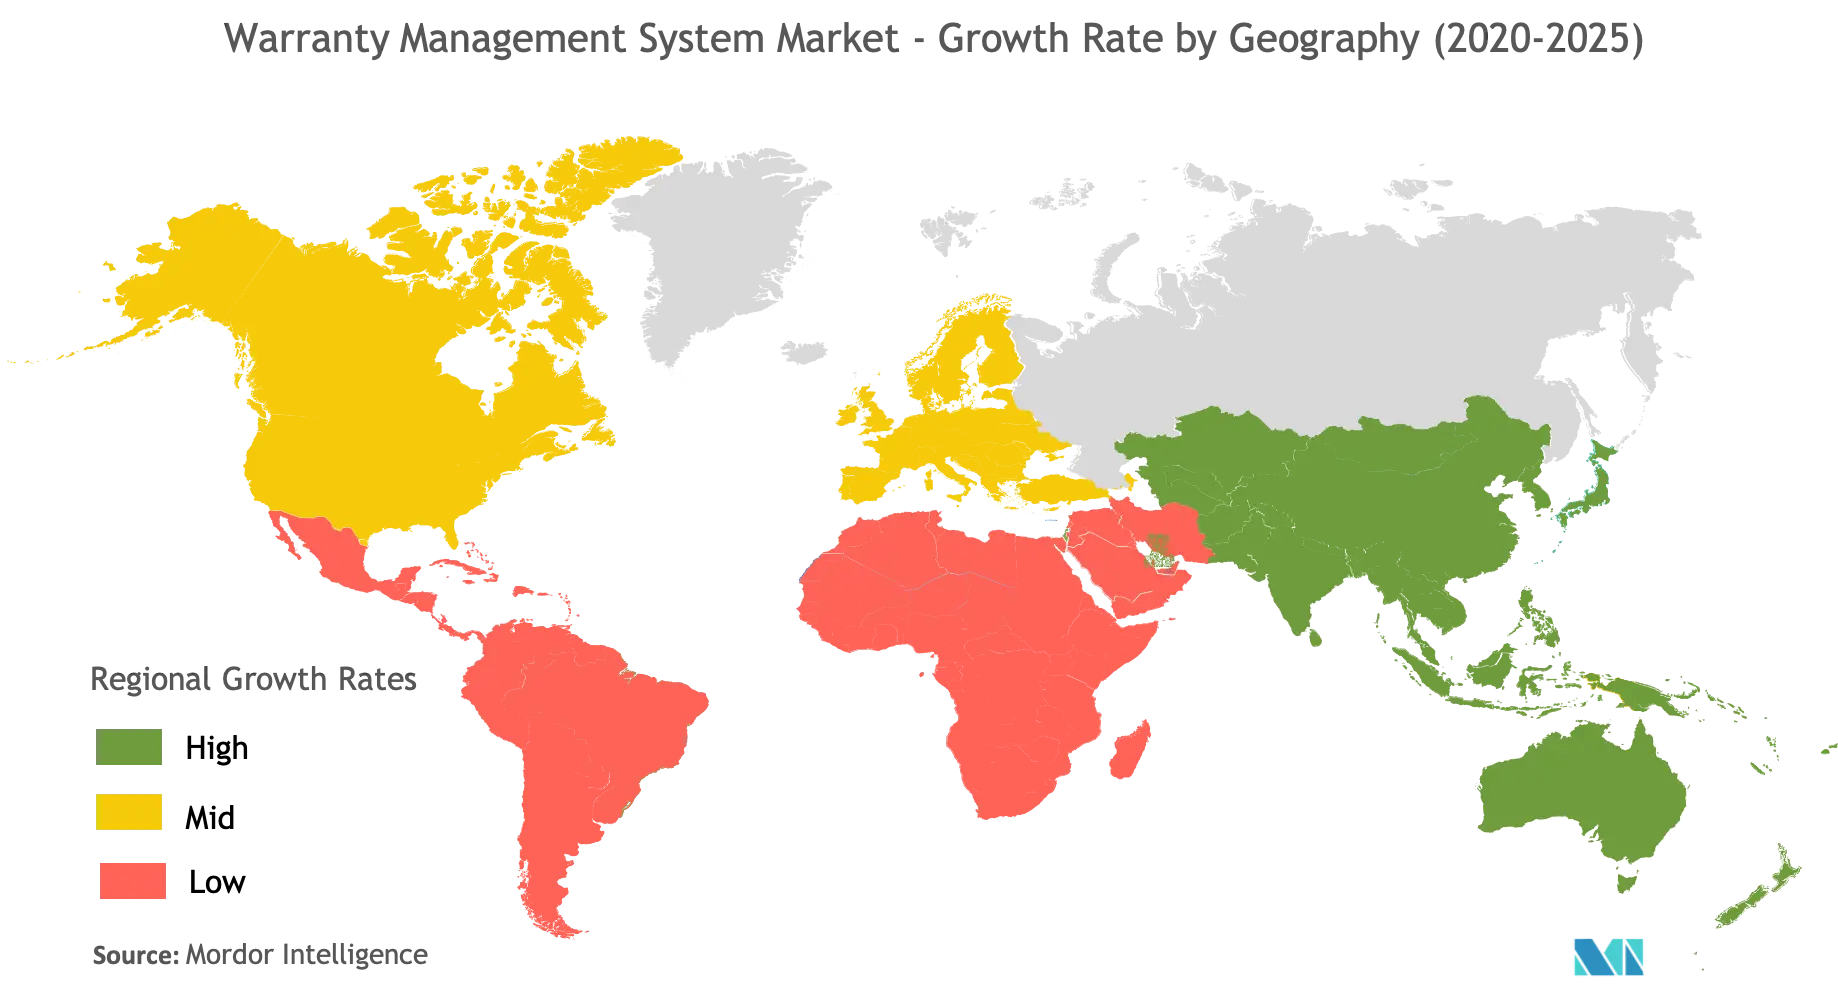 Warranty Management System Market Growth Rate By Region